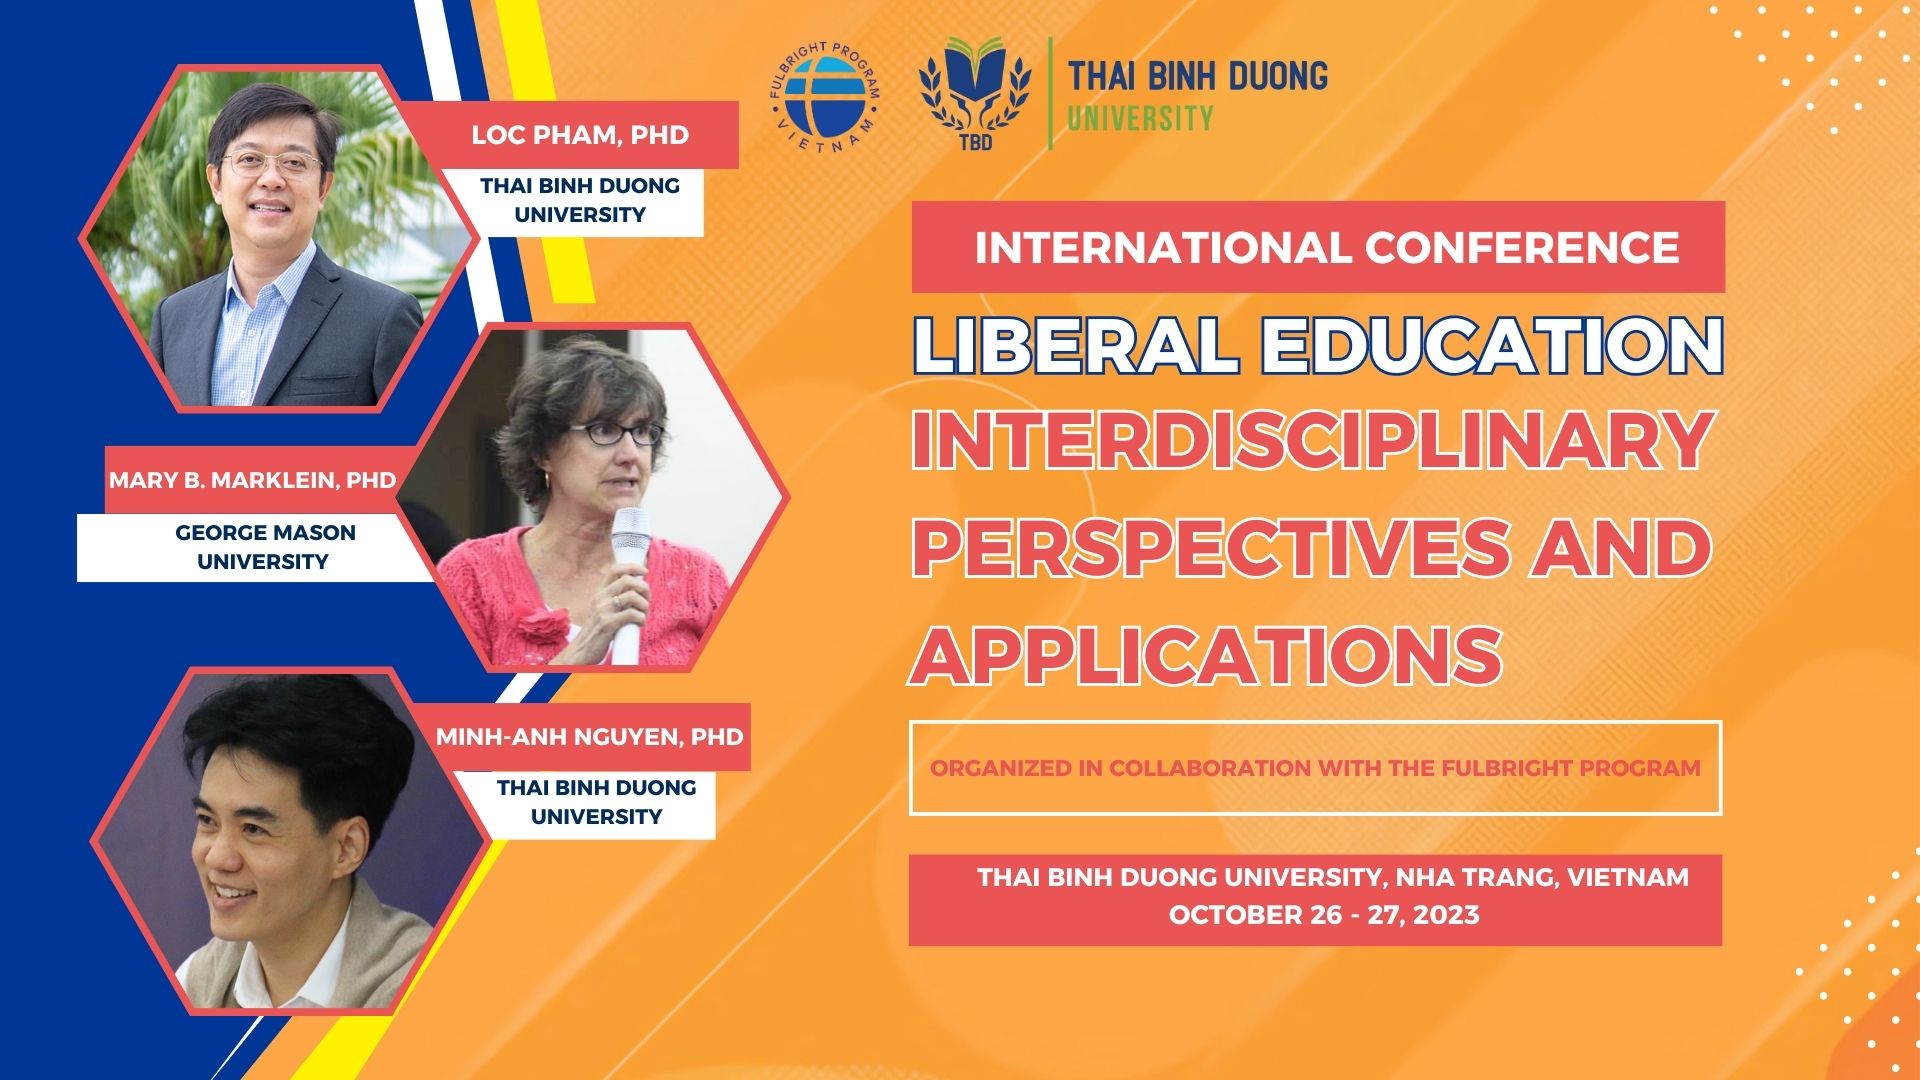 Call for Papers: International Conference on “Liberal Education: Interdisciplinary Perspectives and Applications”